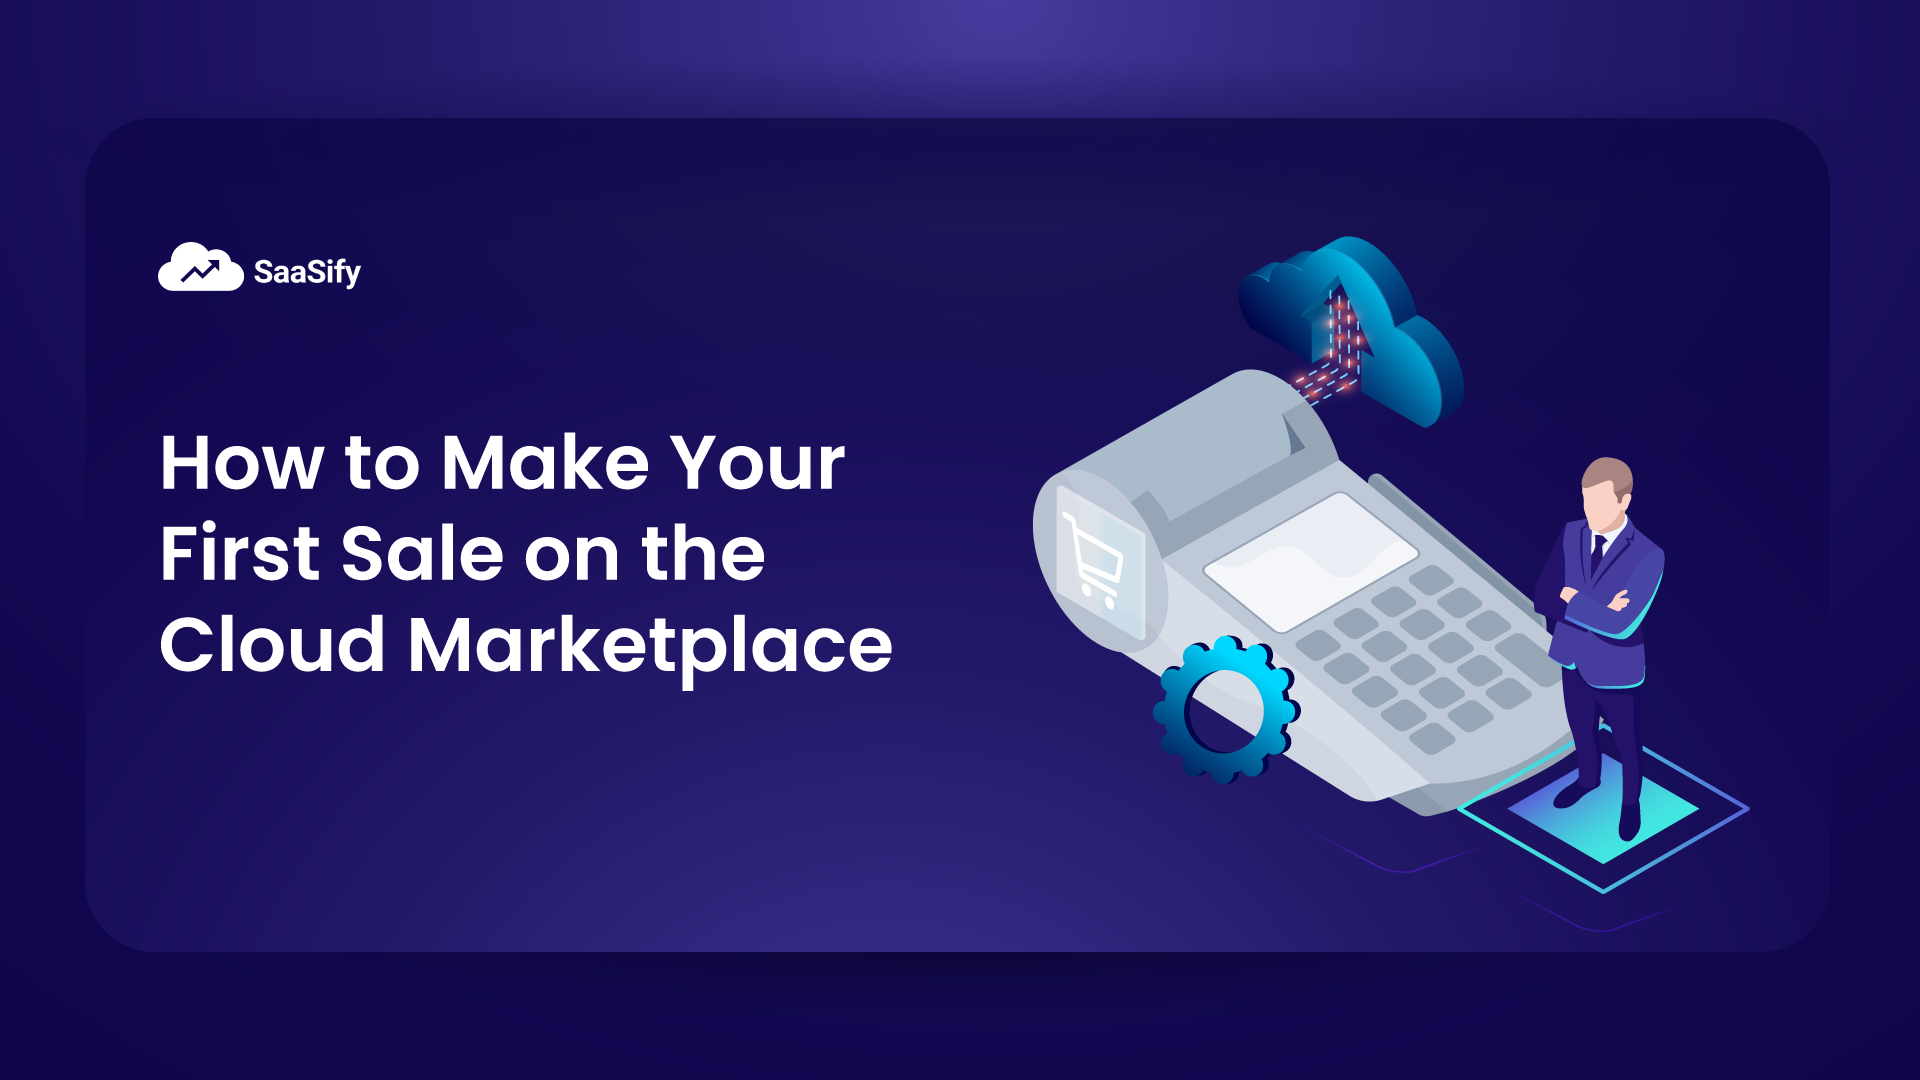 How to Make Your First Cloud Marketplace Sale